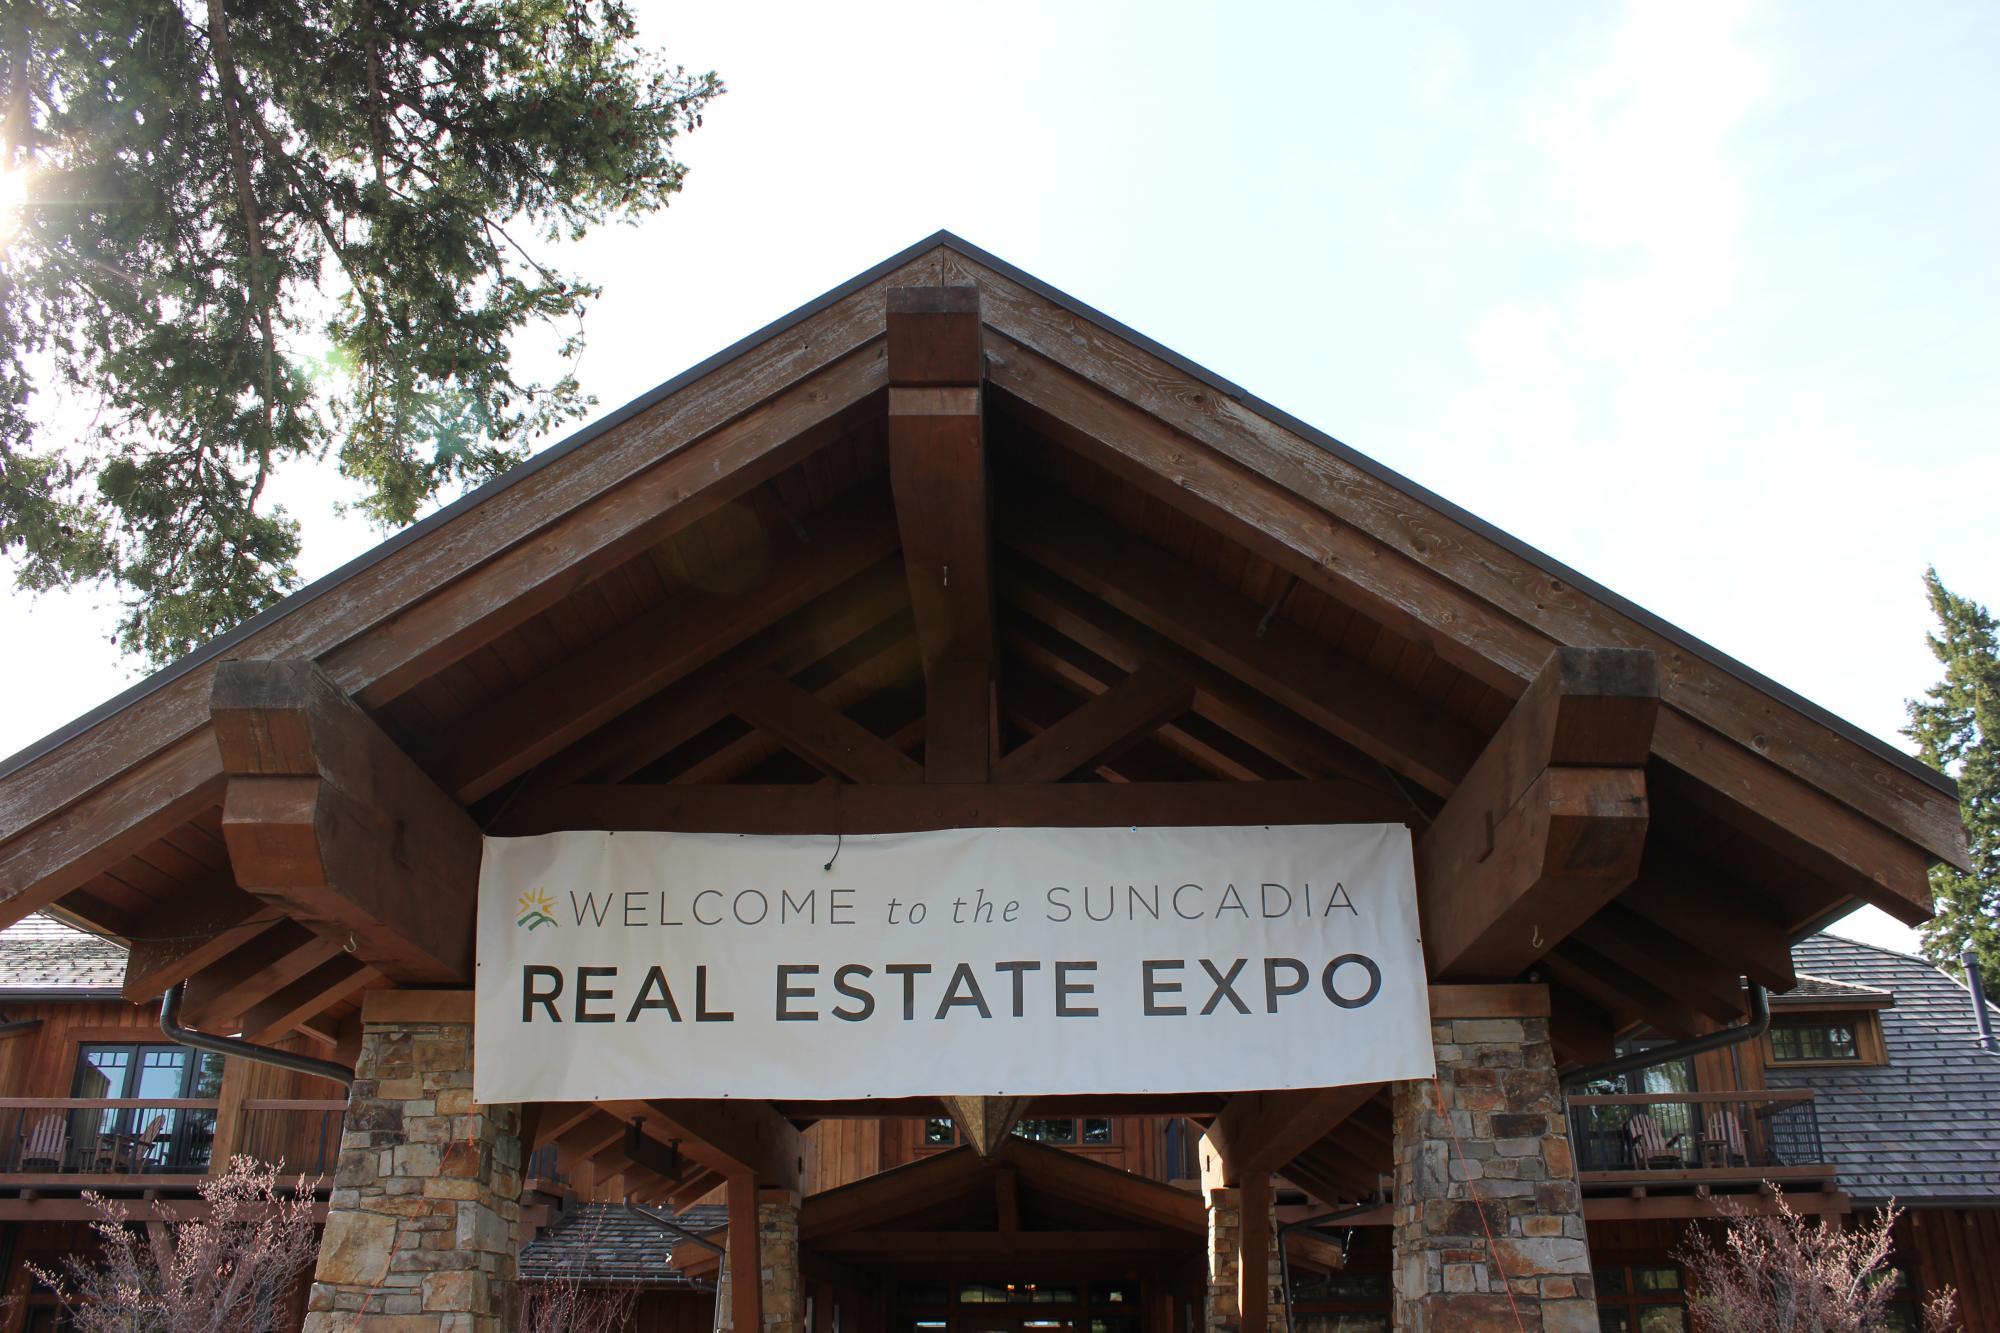 a welcome sign to the real estate expo.